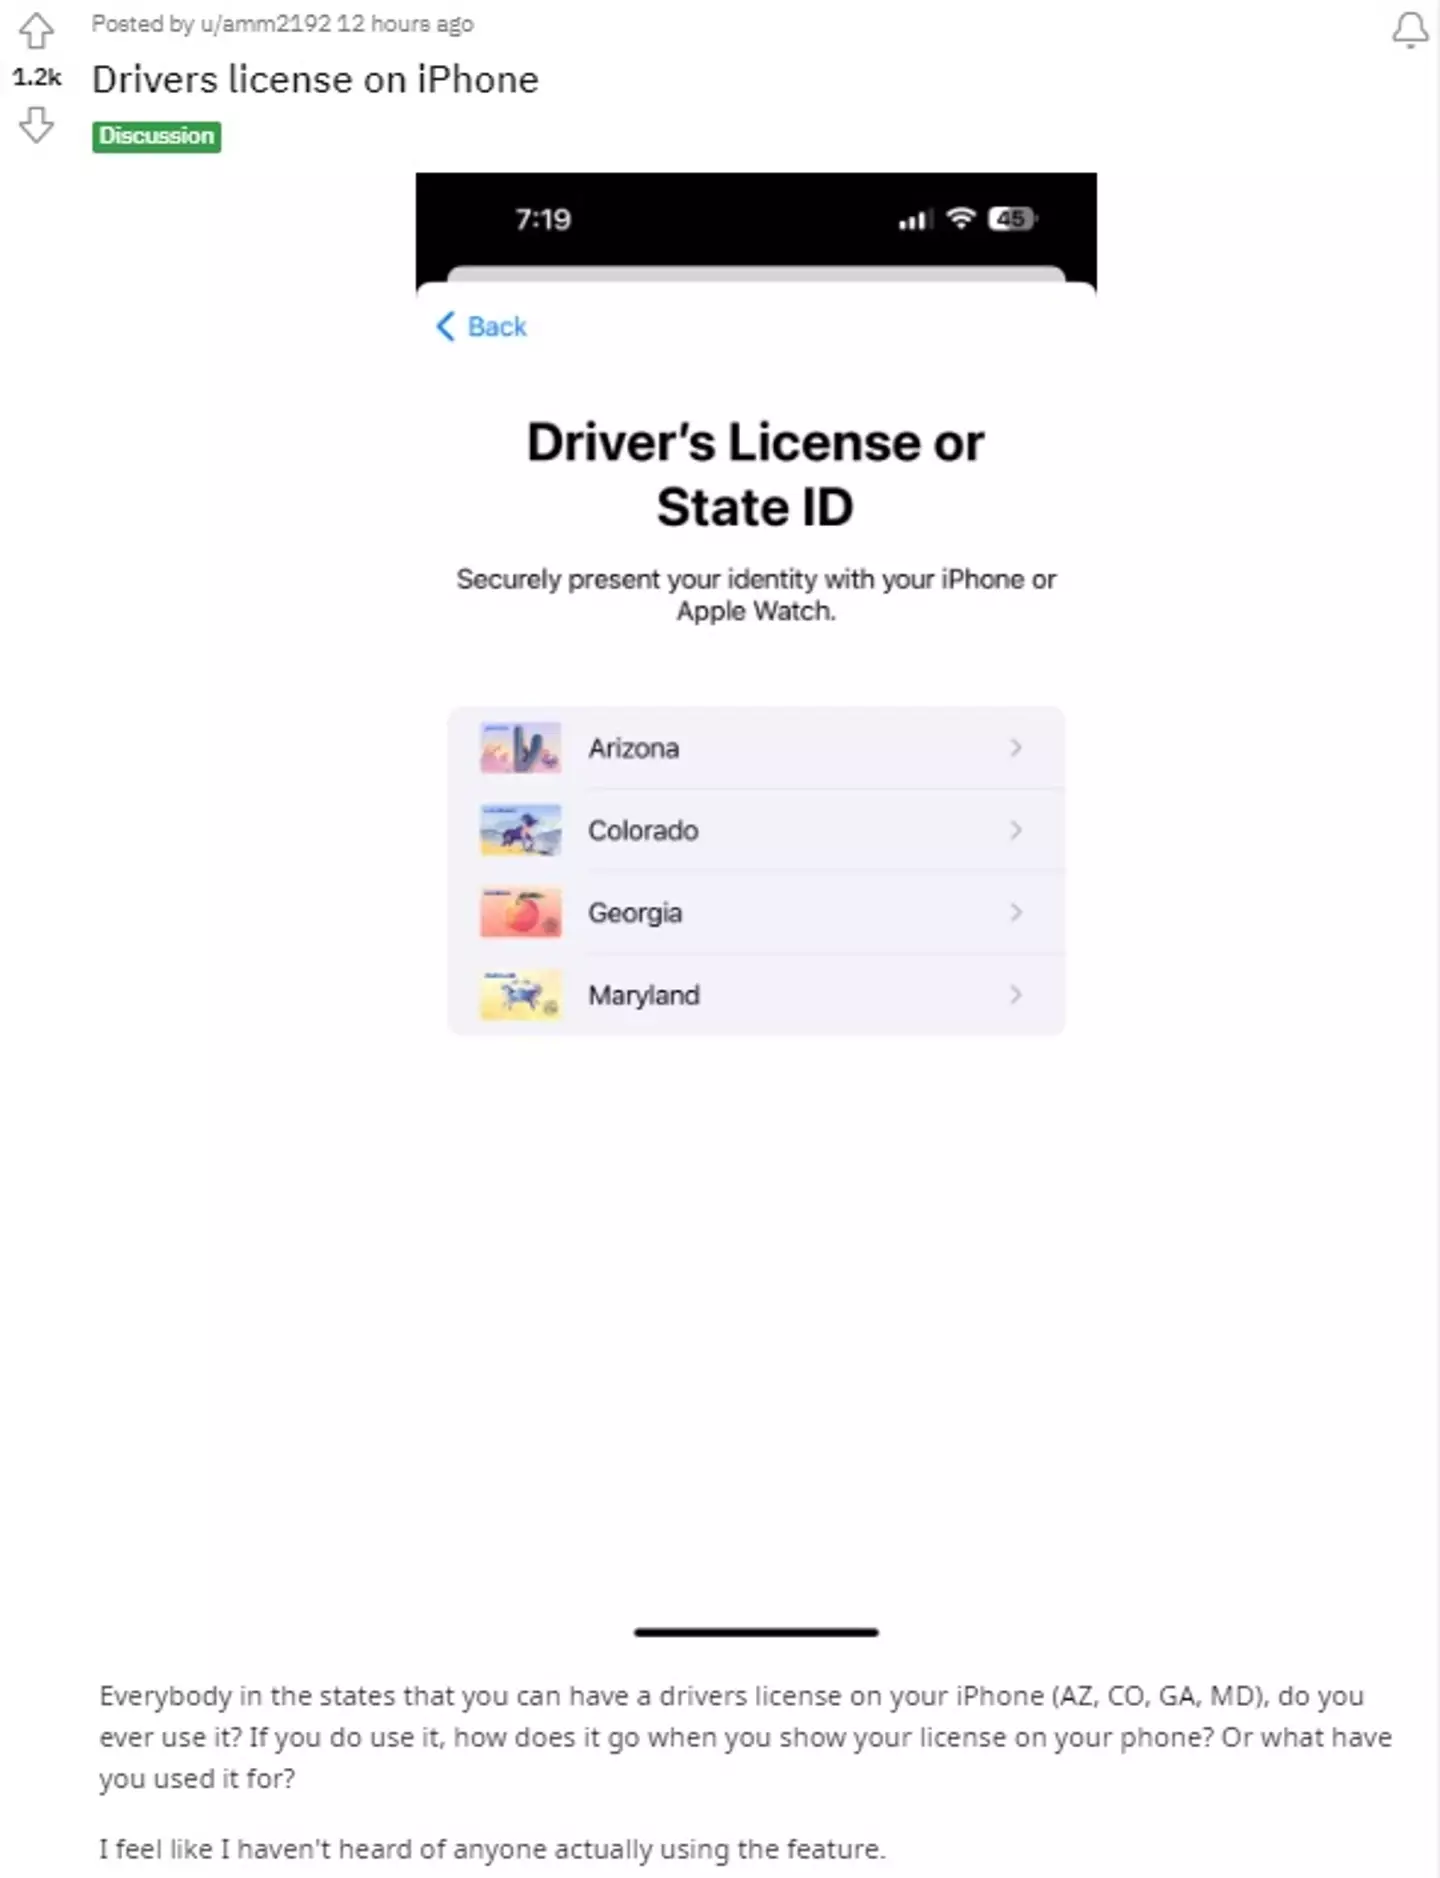 One Redditor is asking about the Apple feature that lets you store your driver's license on your iPhone or Apple Watch.